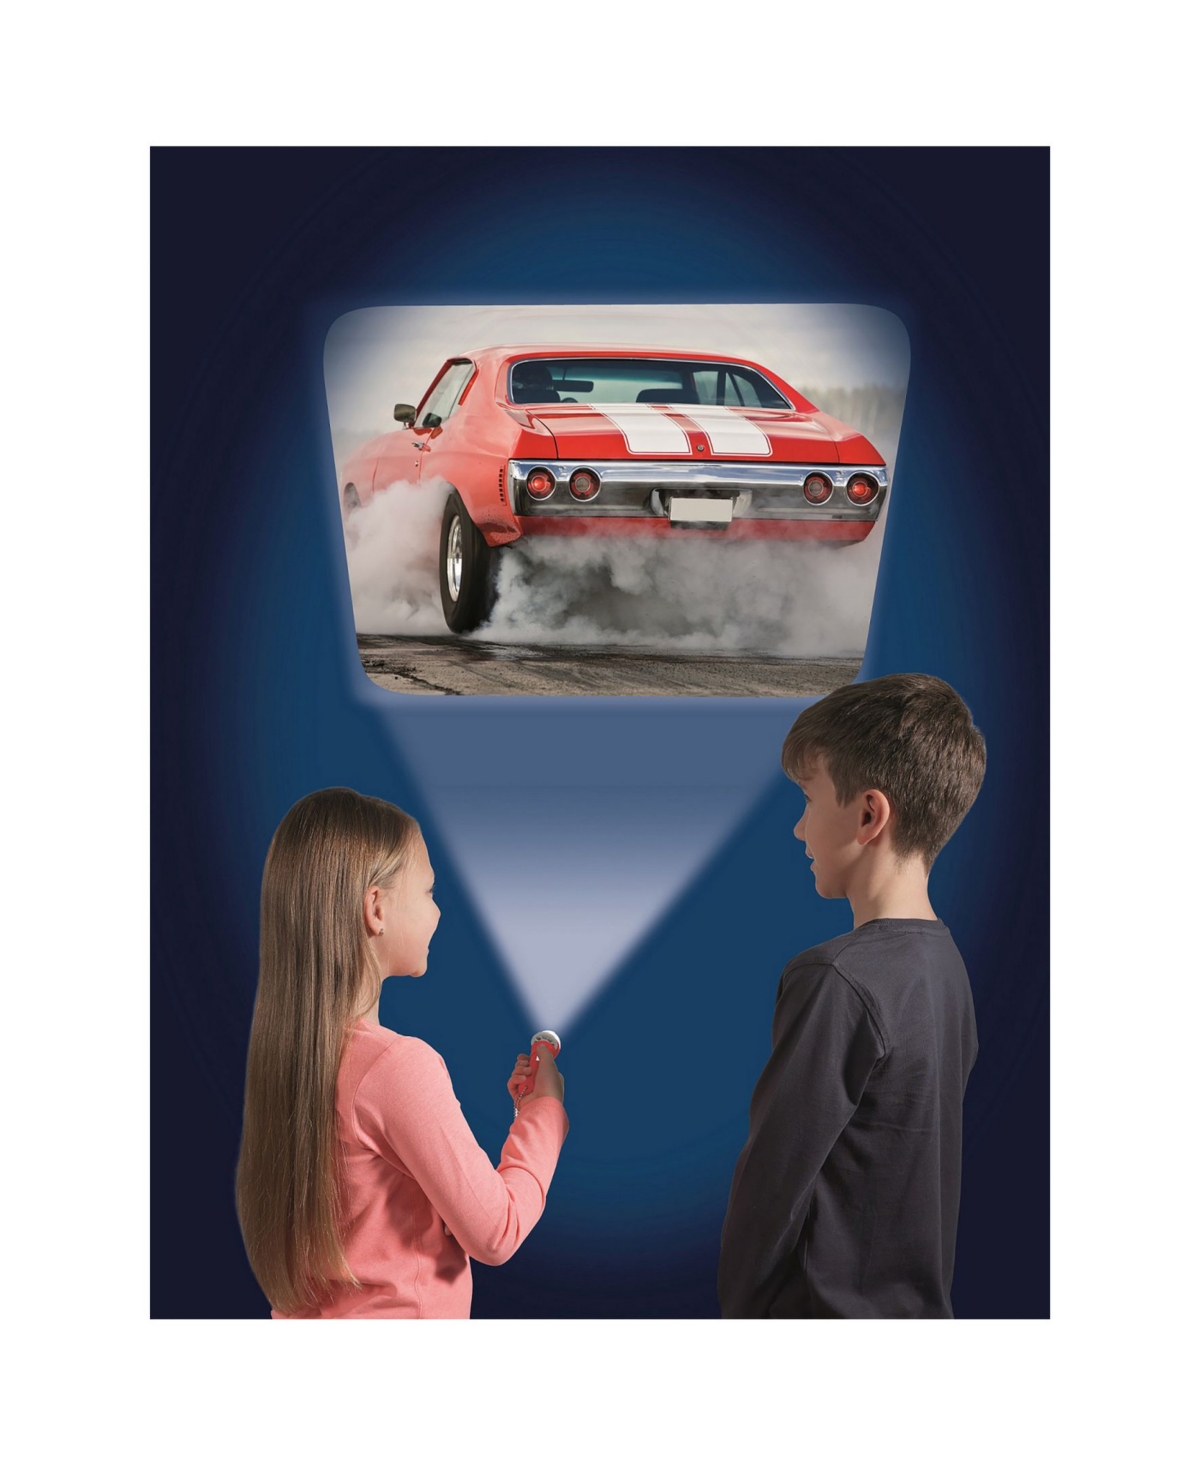 Shop Redbox Brainstorm Toys Super Cars Flashlight And Projector With 24 Car Images In Multi